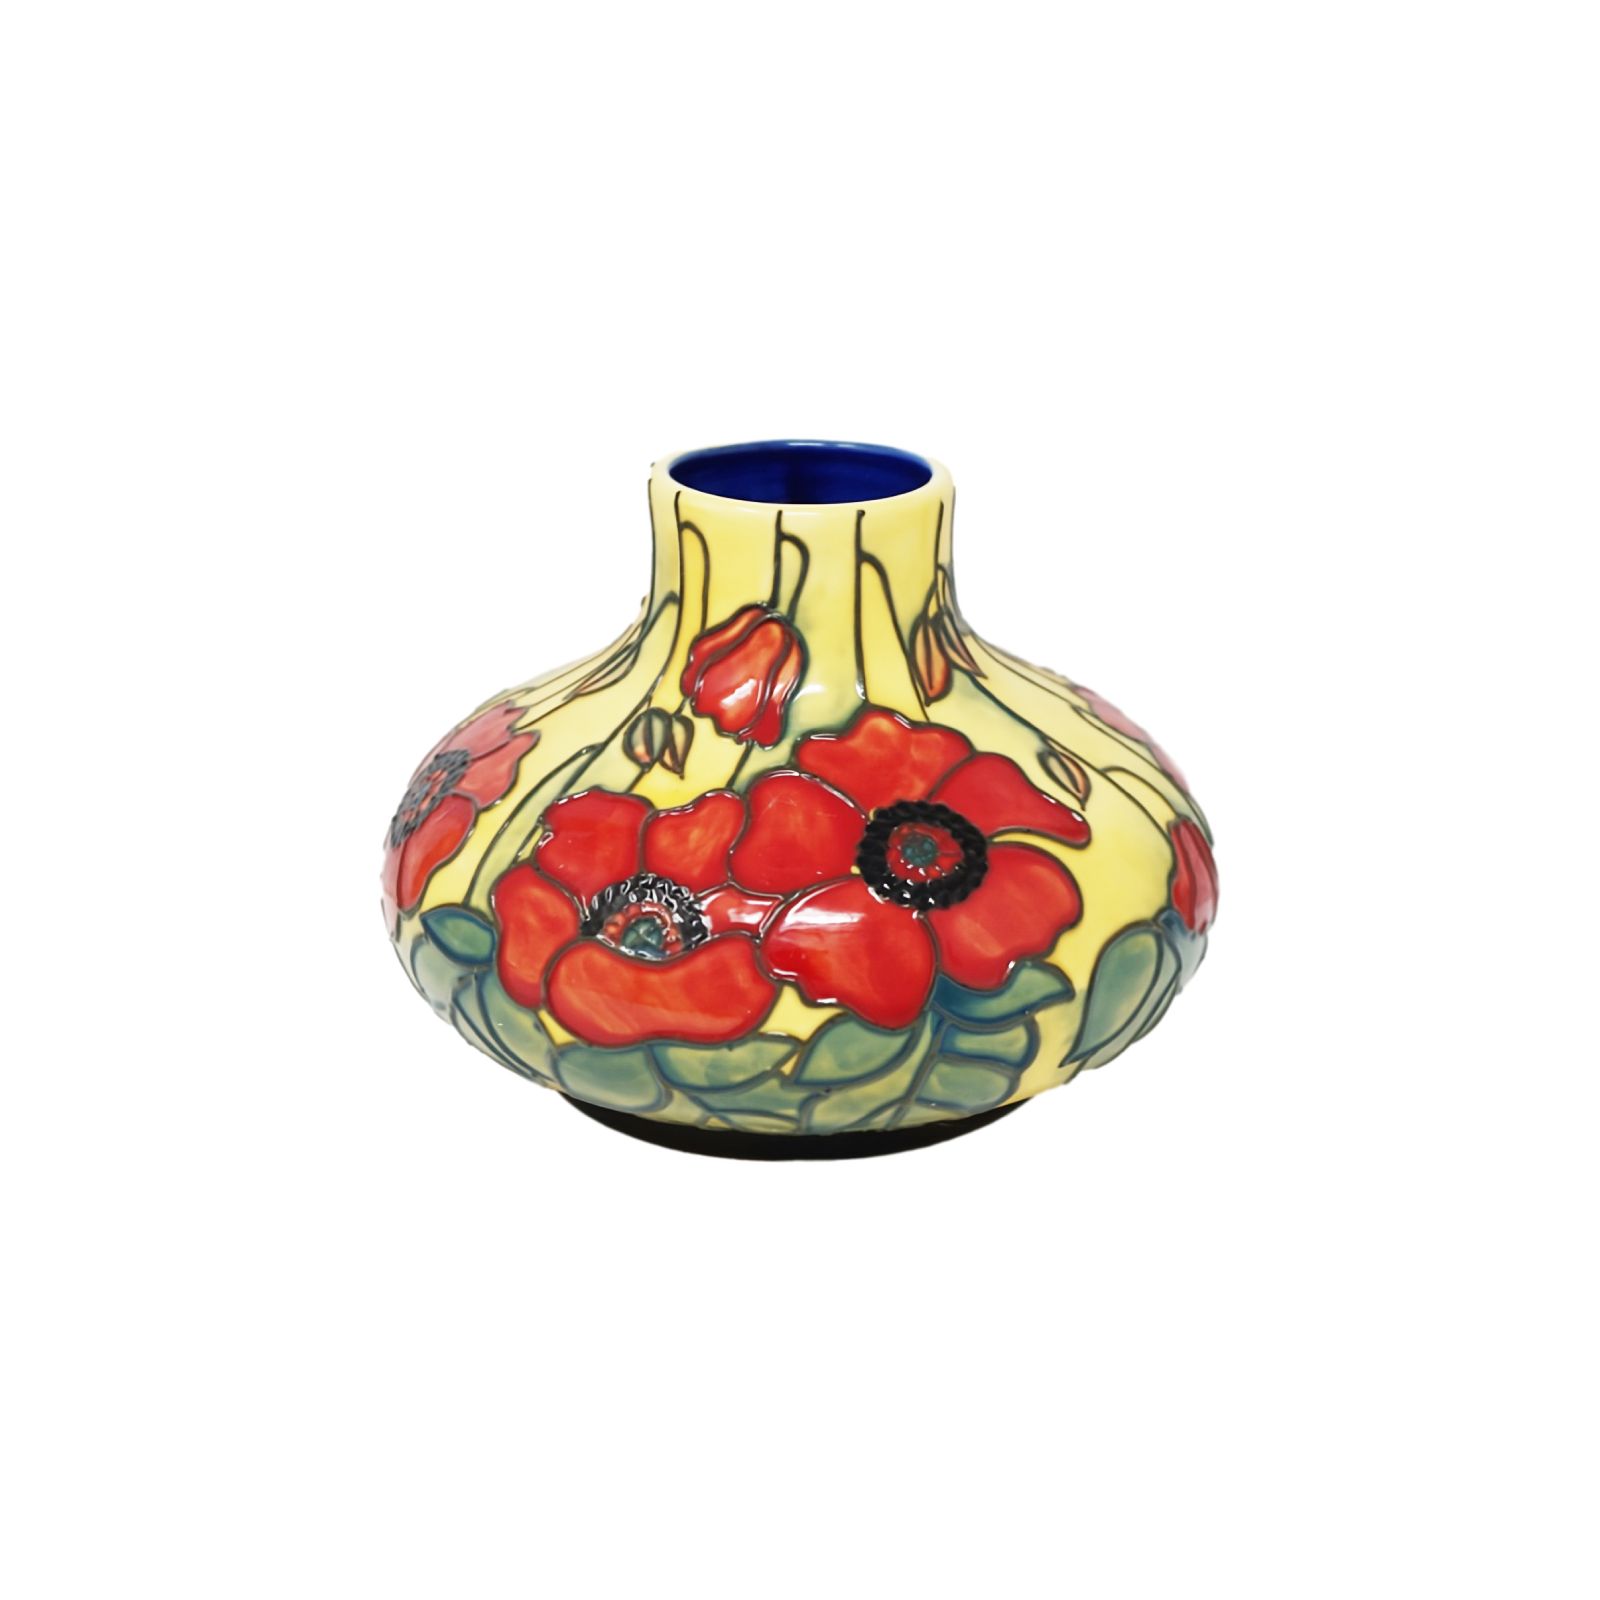 bud vase with remembrance day decoration red poppy decor around tube lining hand painted